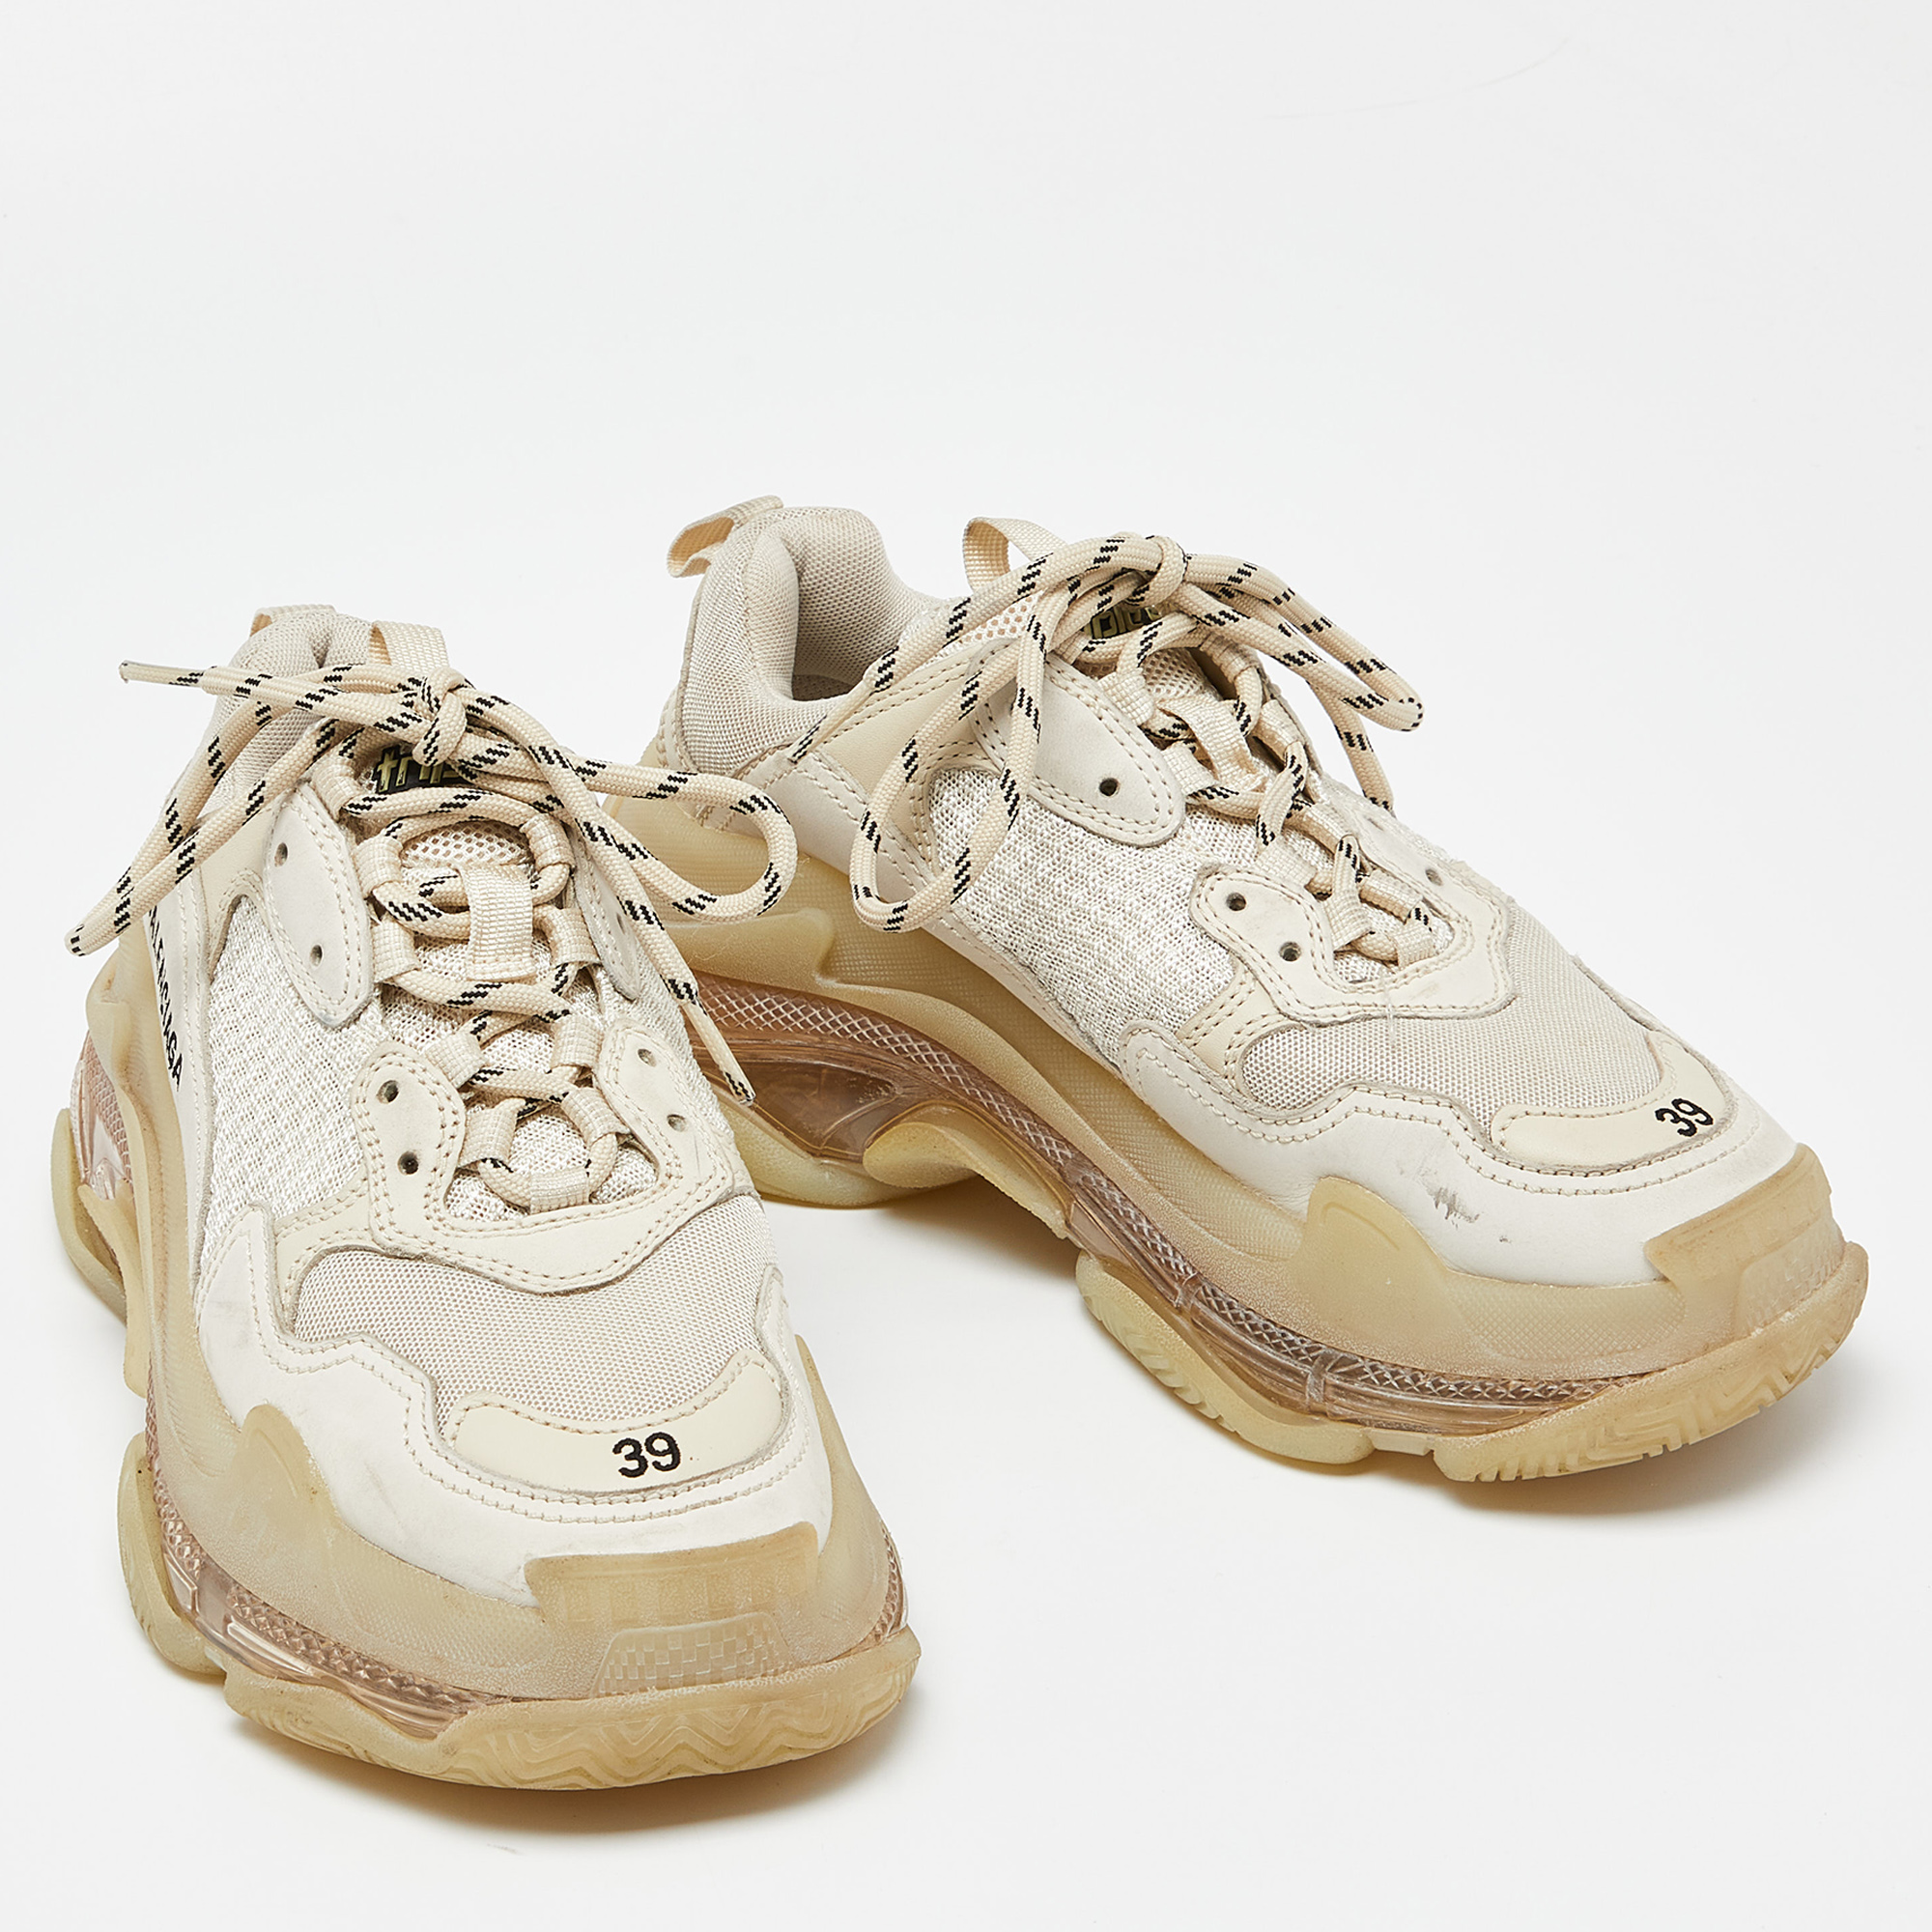 Balenciaga Cream Leather And Mesh Triple S Clear Sole Sneakers Size 39